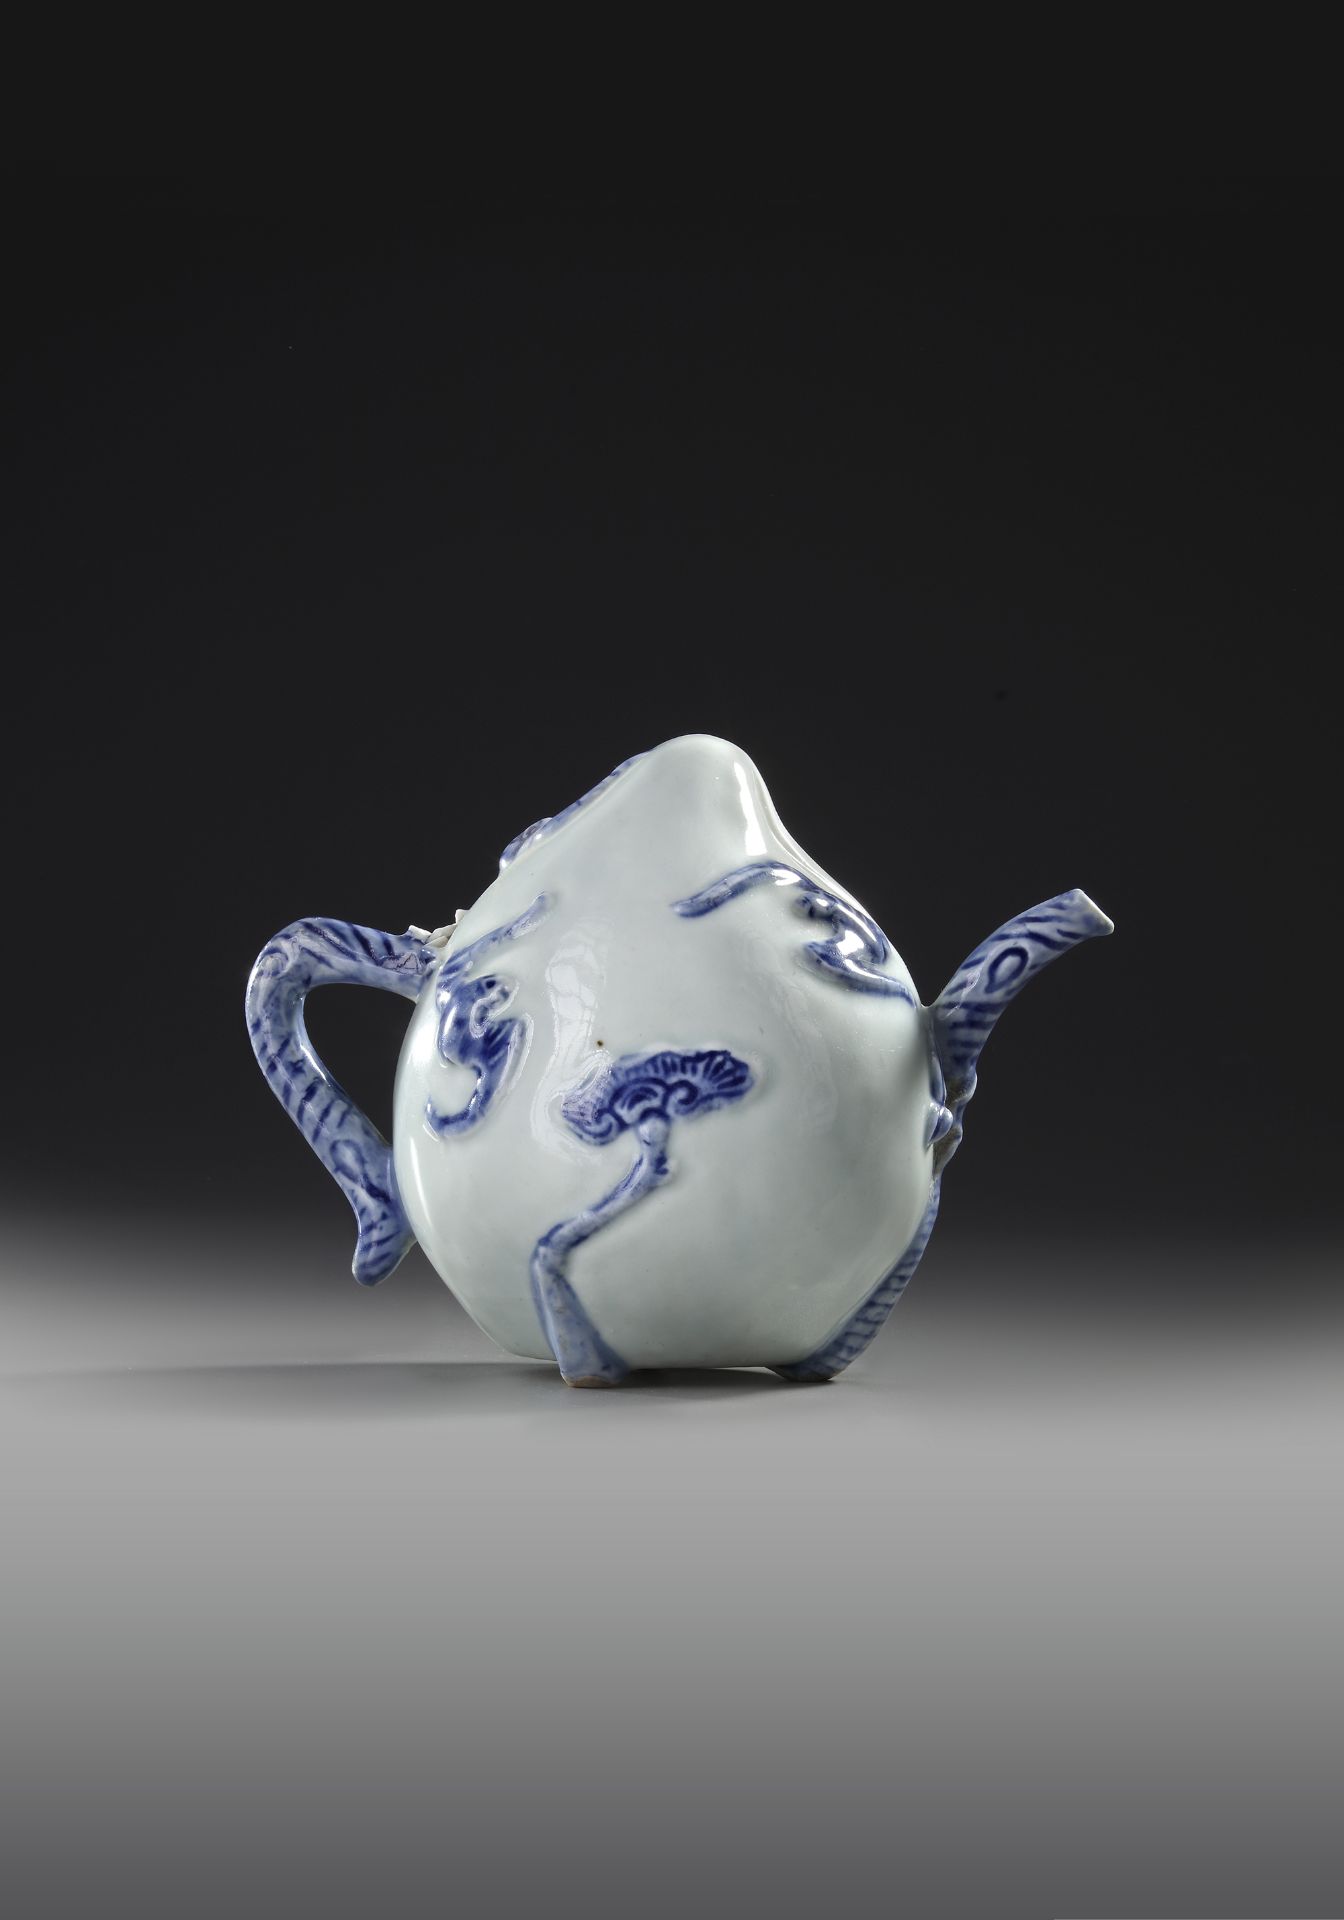 A CHINESE BLUE AND WHITE-GLAZED PEACH-FORM 'CADOGAN' TEAPOT, 19TH CENTURY - Image 2 of 4